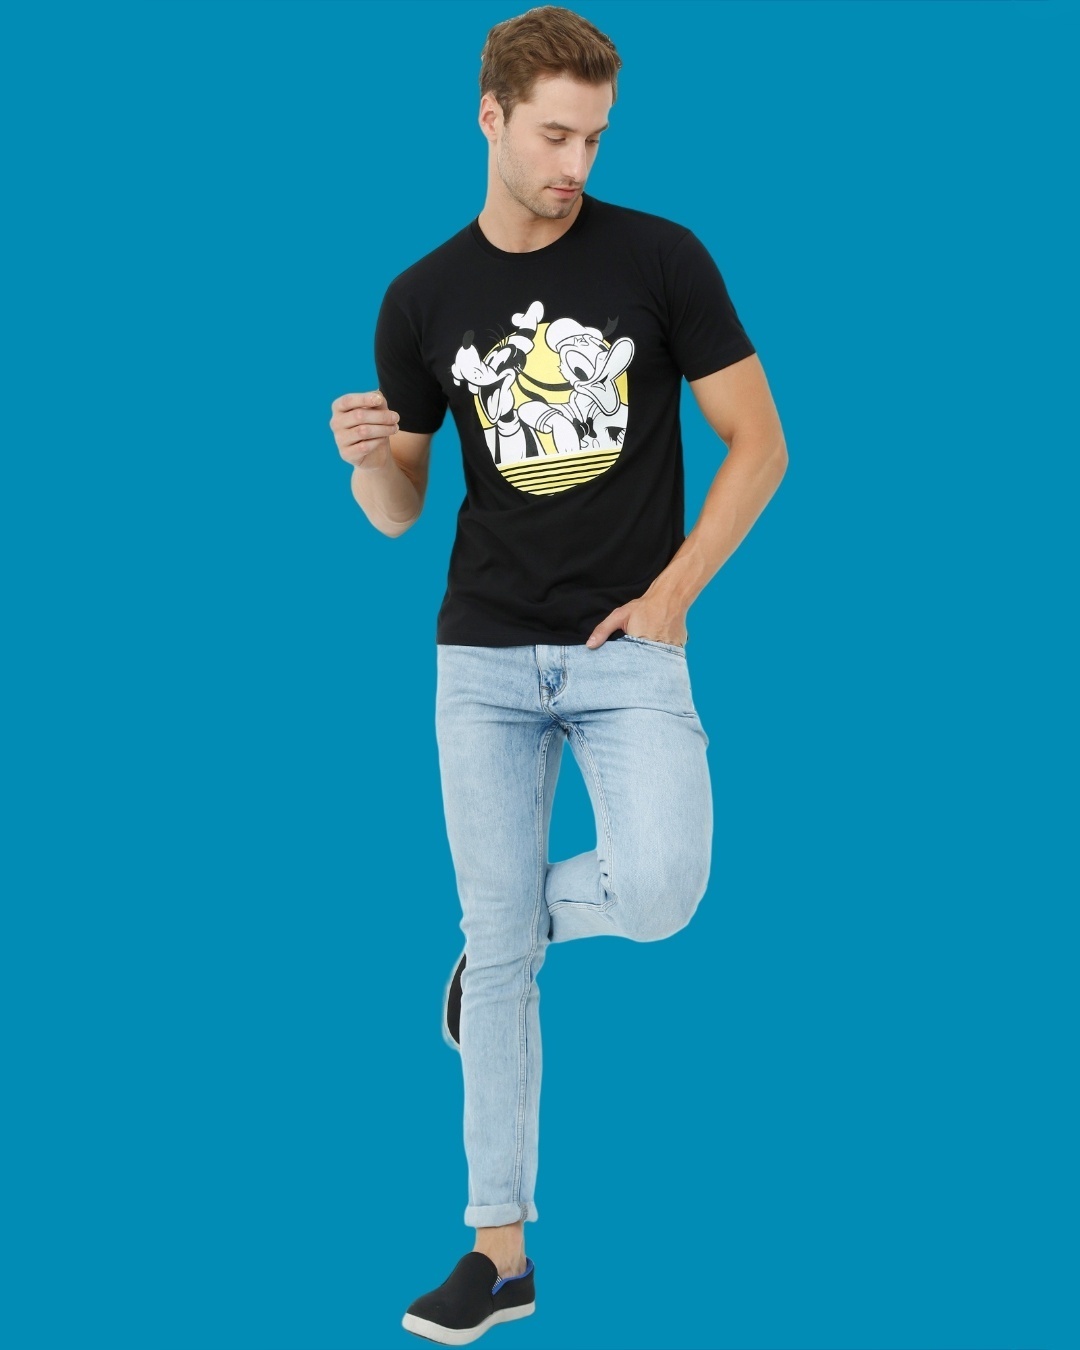 Shop Men's Black Donald and Goofy Graphic Printed T-shirt